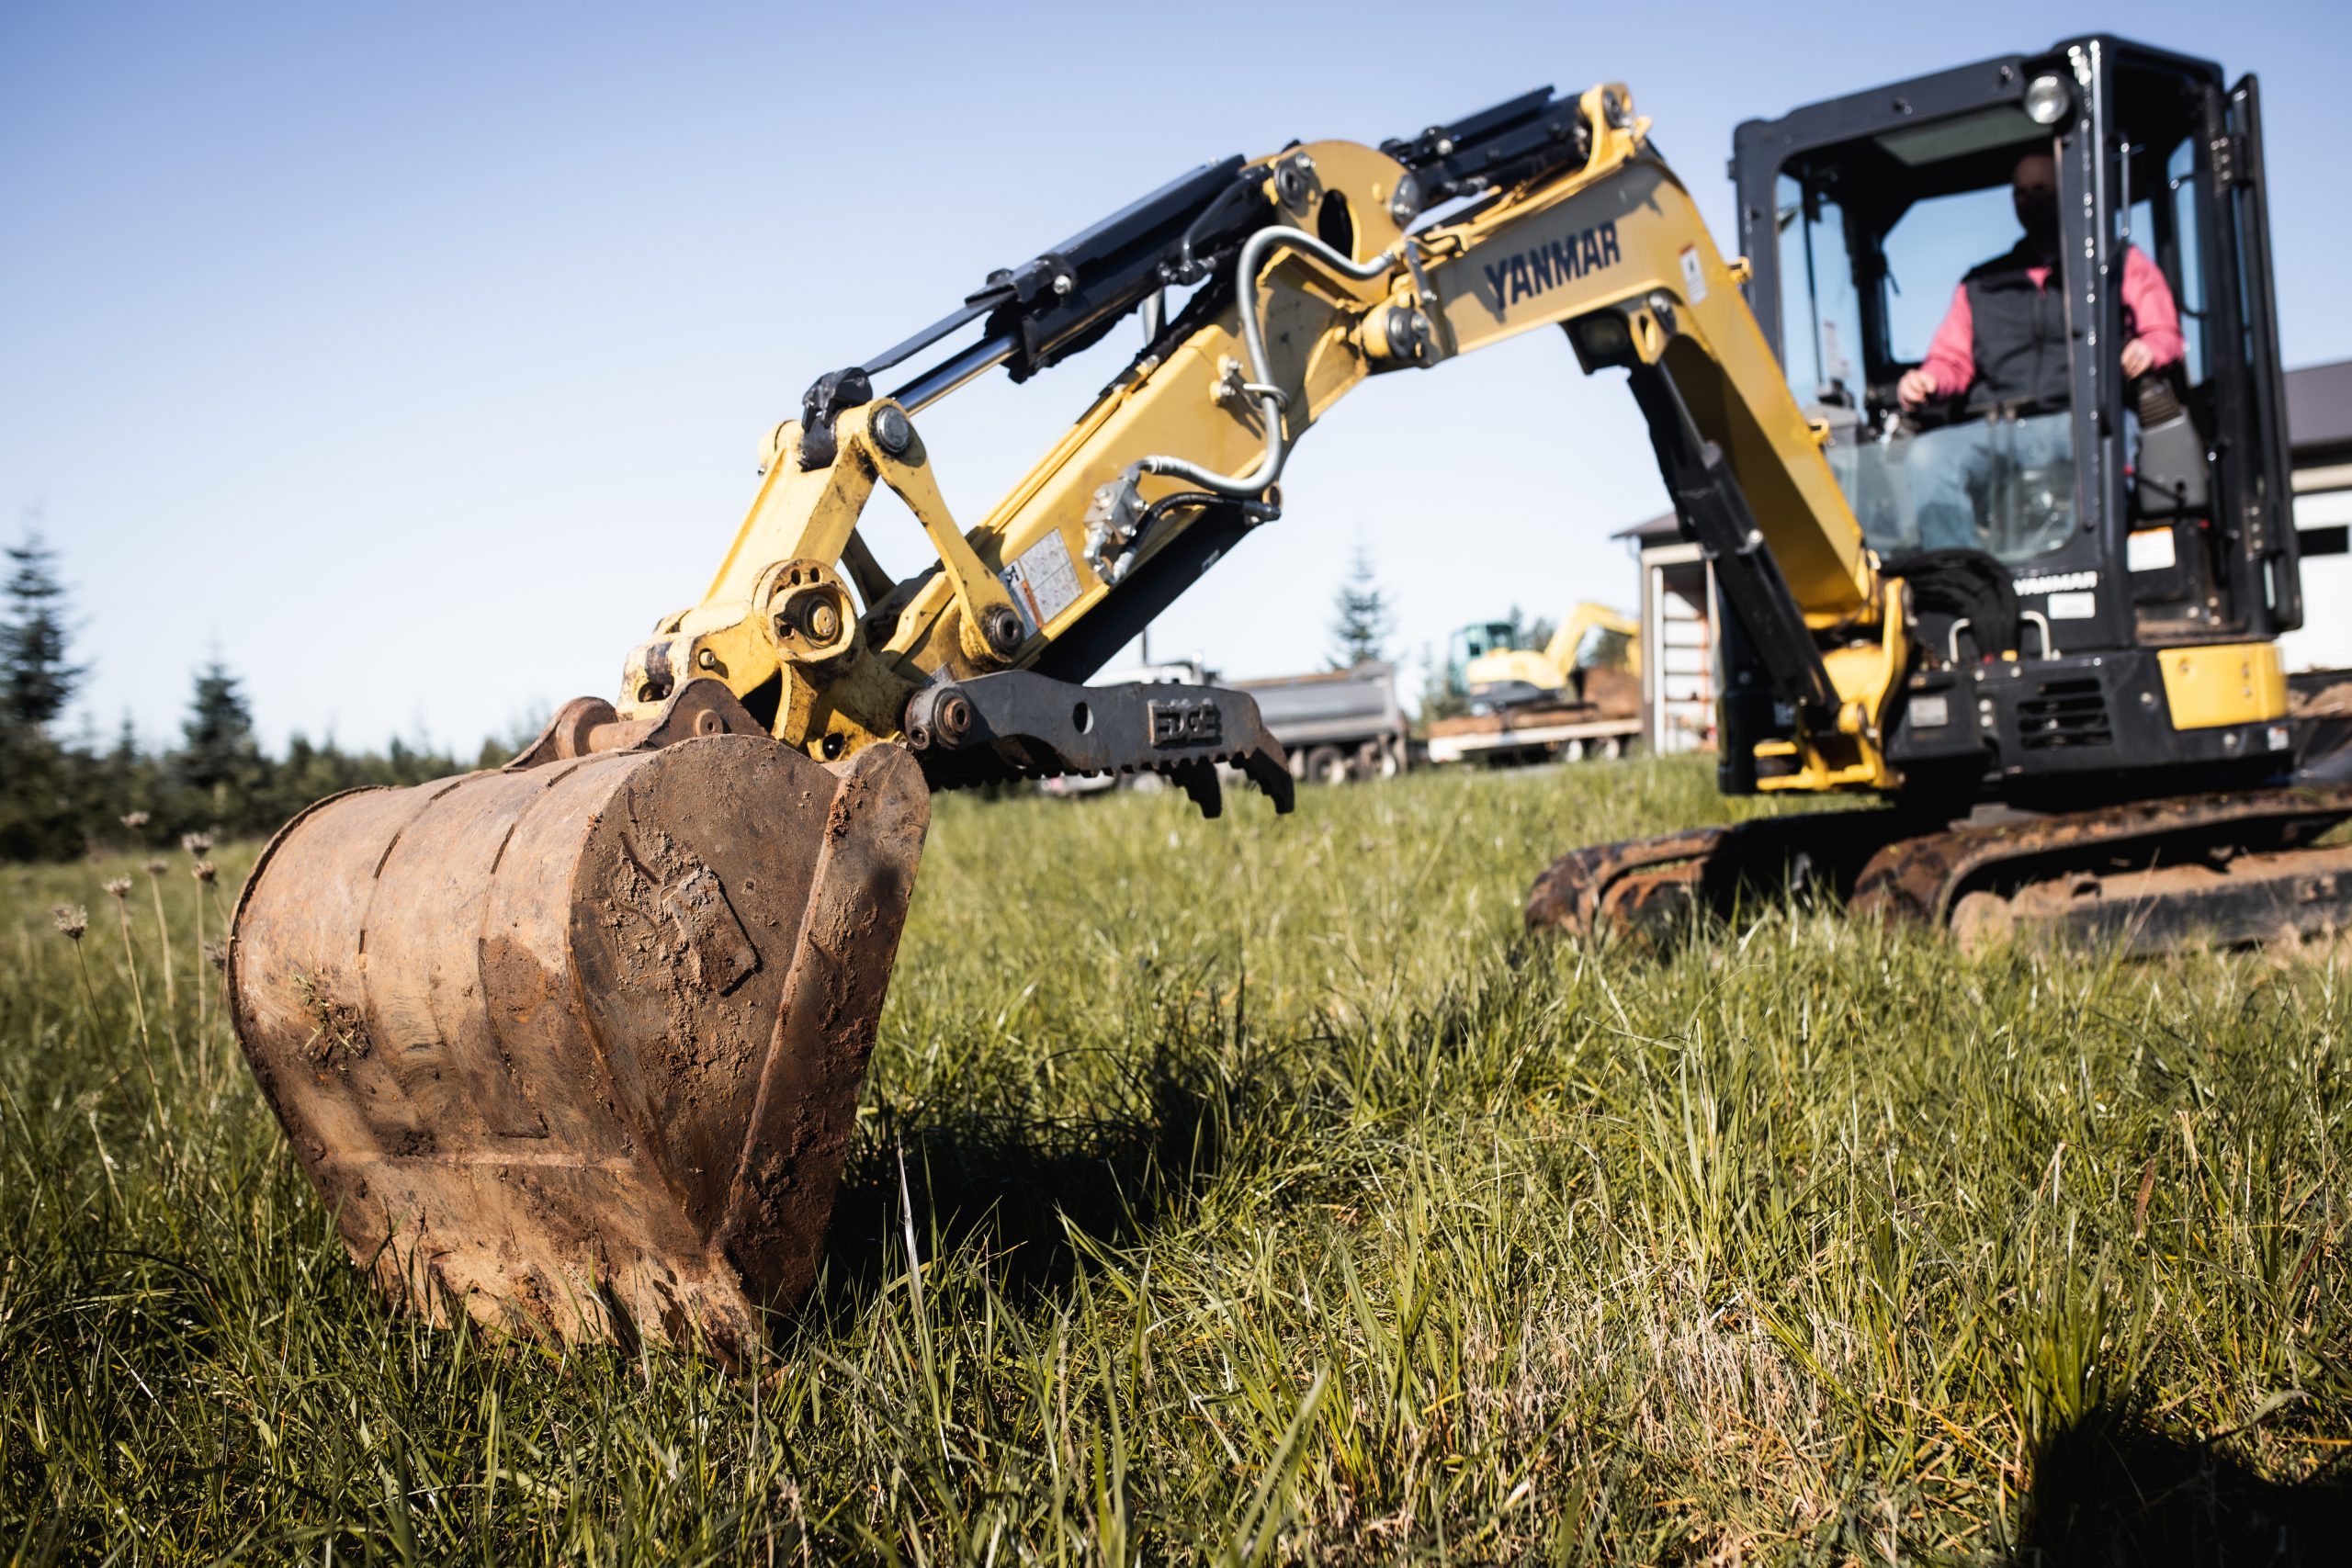 Image of Byers Oregon City Septic Tank Services at work